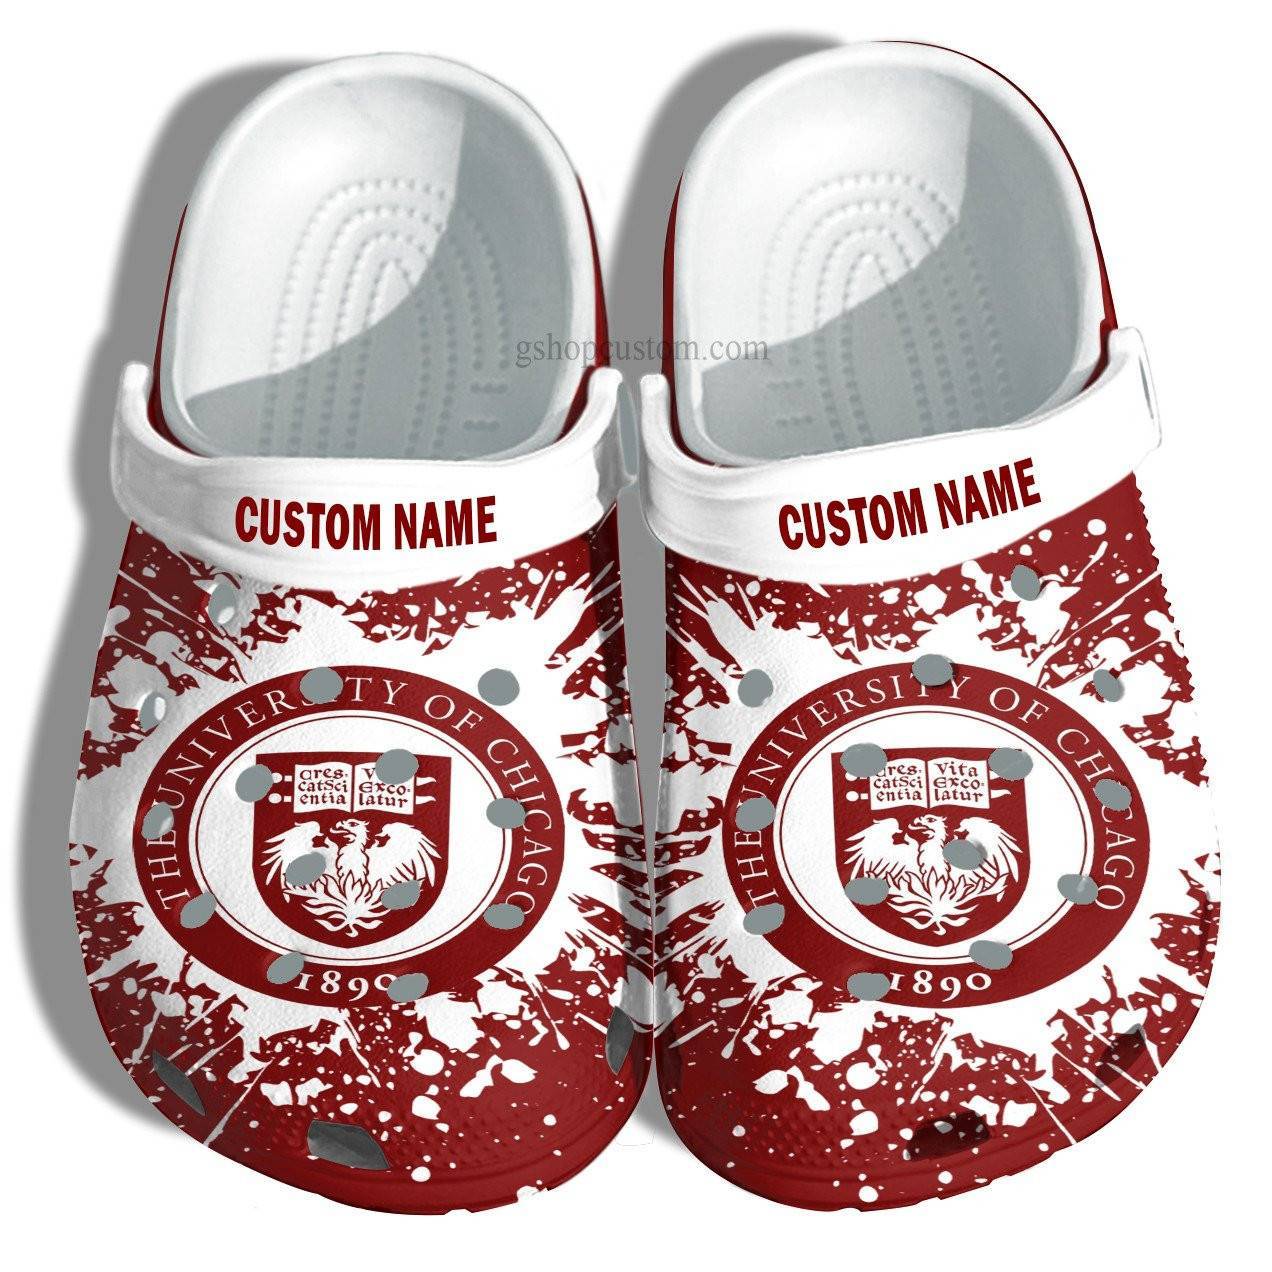 University Of Chicago Graduation Gifts Croc Shoes Customize – Admission Gift Crocss Shoes